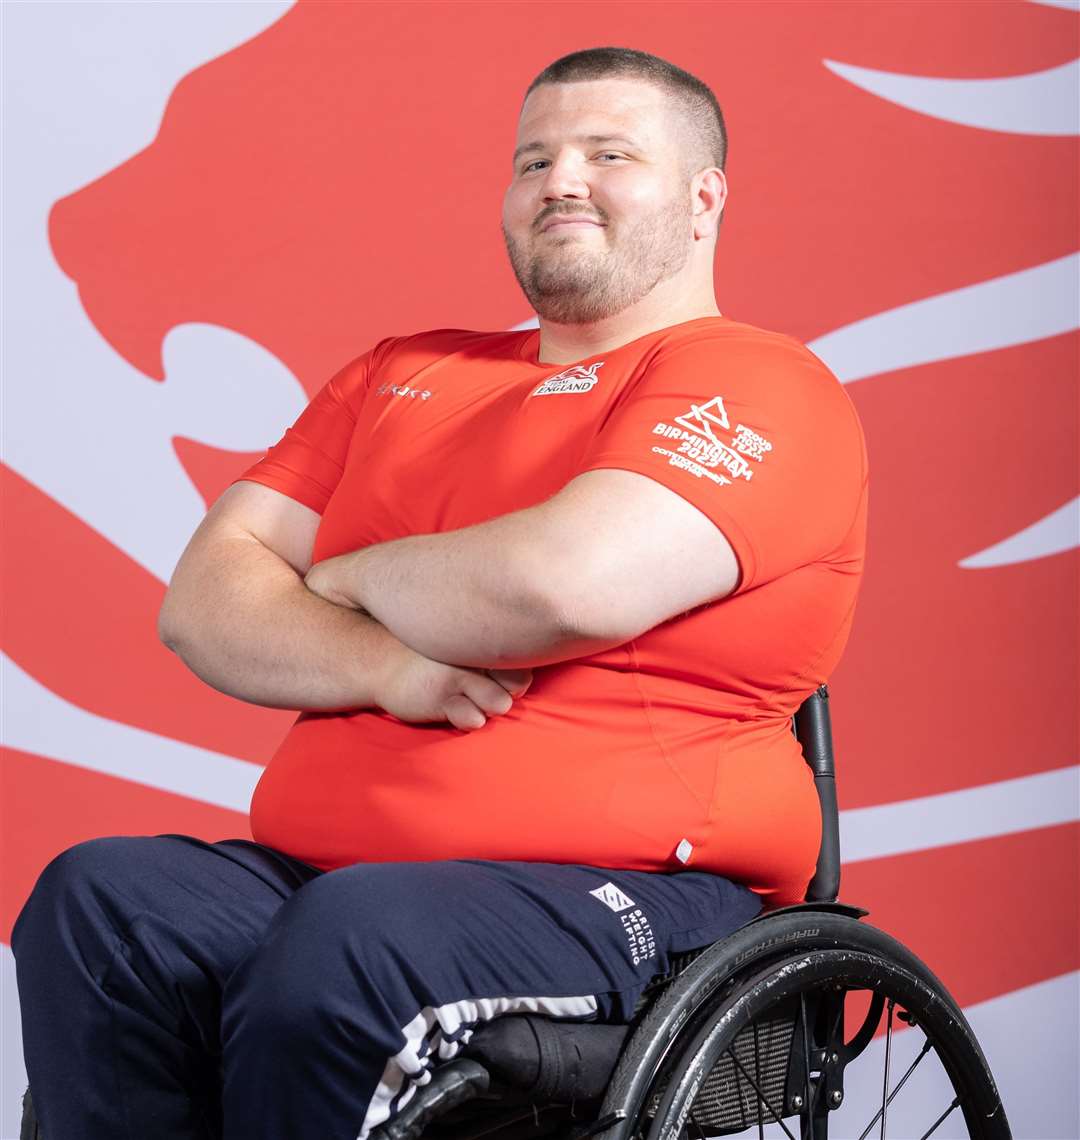 Liam McGarry will make his Commonwealth Games debut in the para powerlifting. Picture: Team England